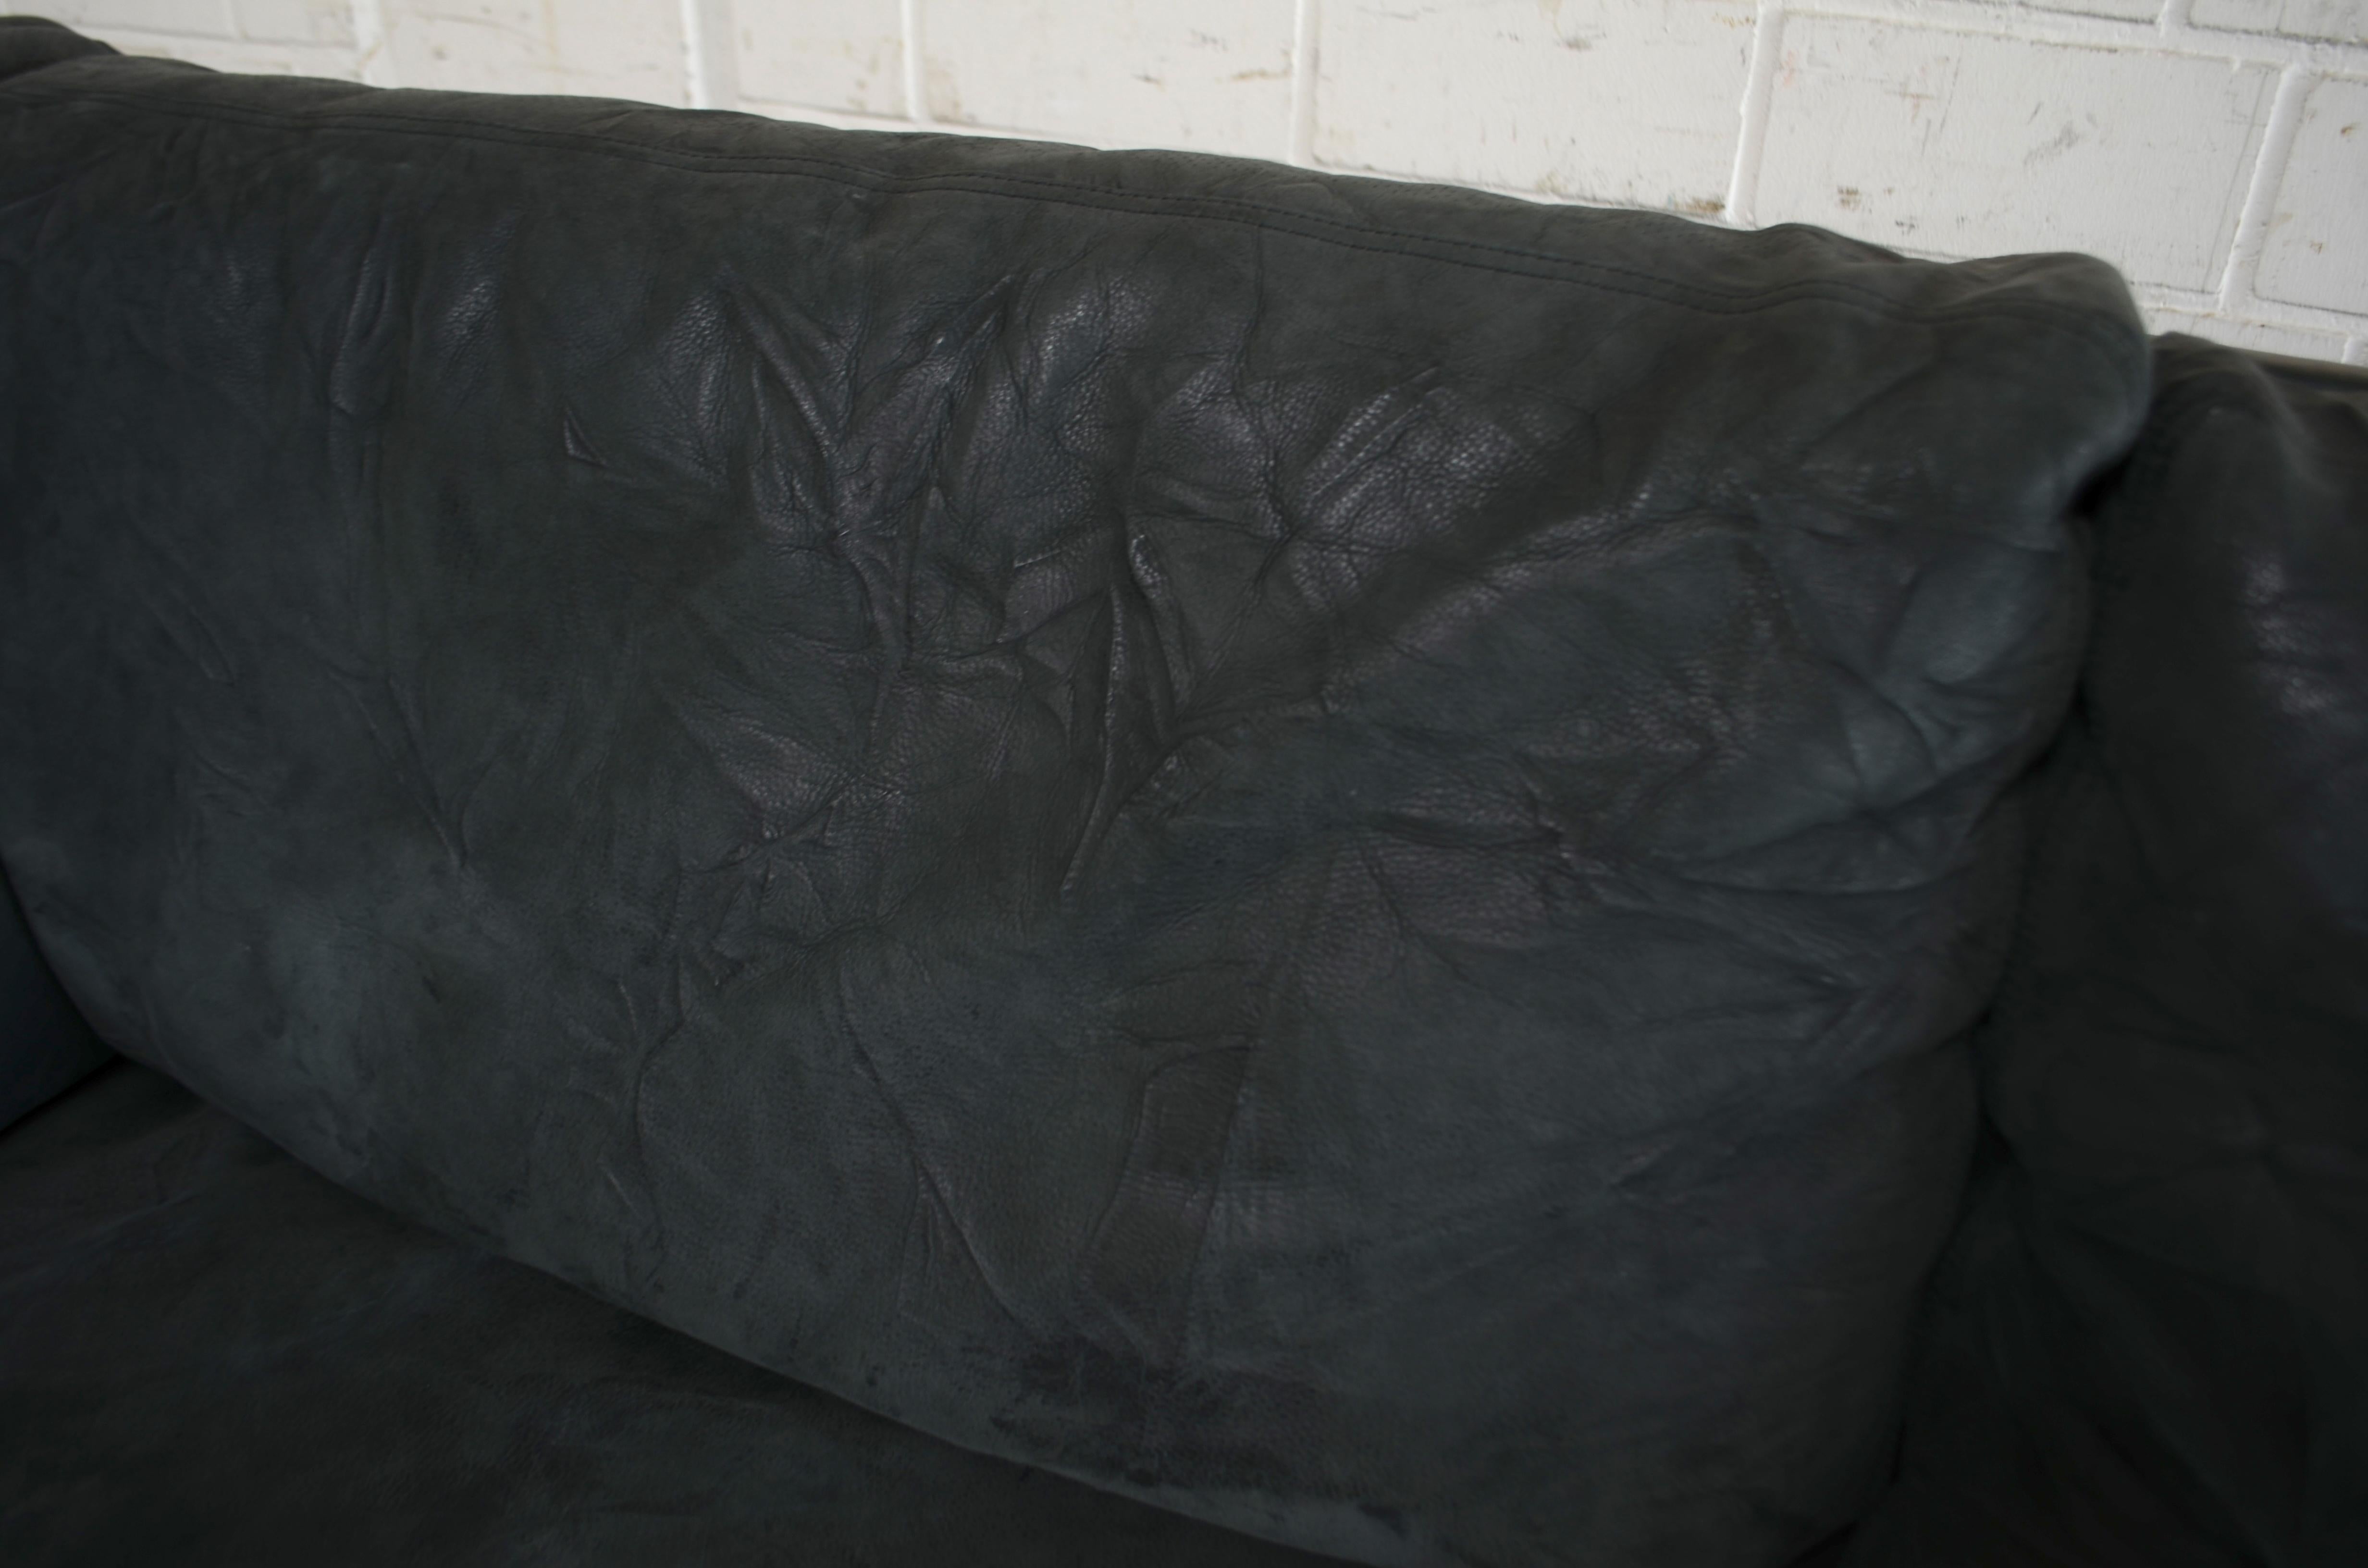 Matteo Grassi  Deluxe Petrol Leather Sofa Nirvana Design by Franco Poli In Good Condition For Sale In Munich, Bavaria